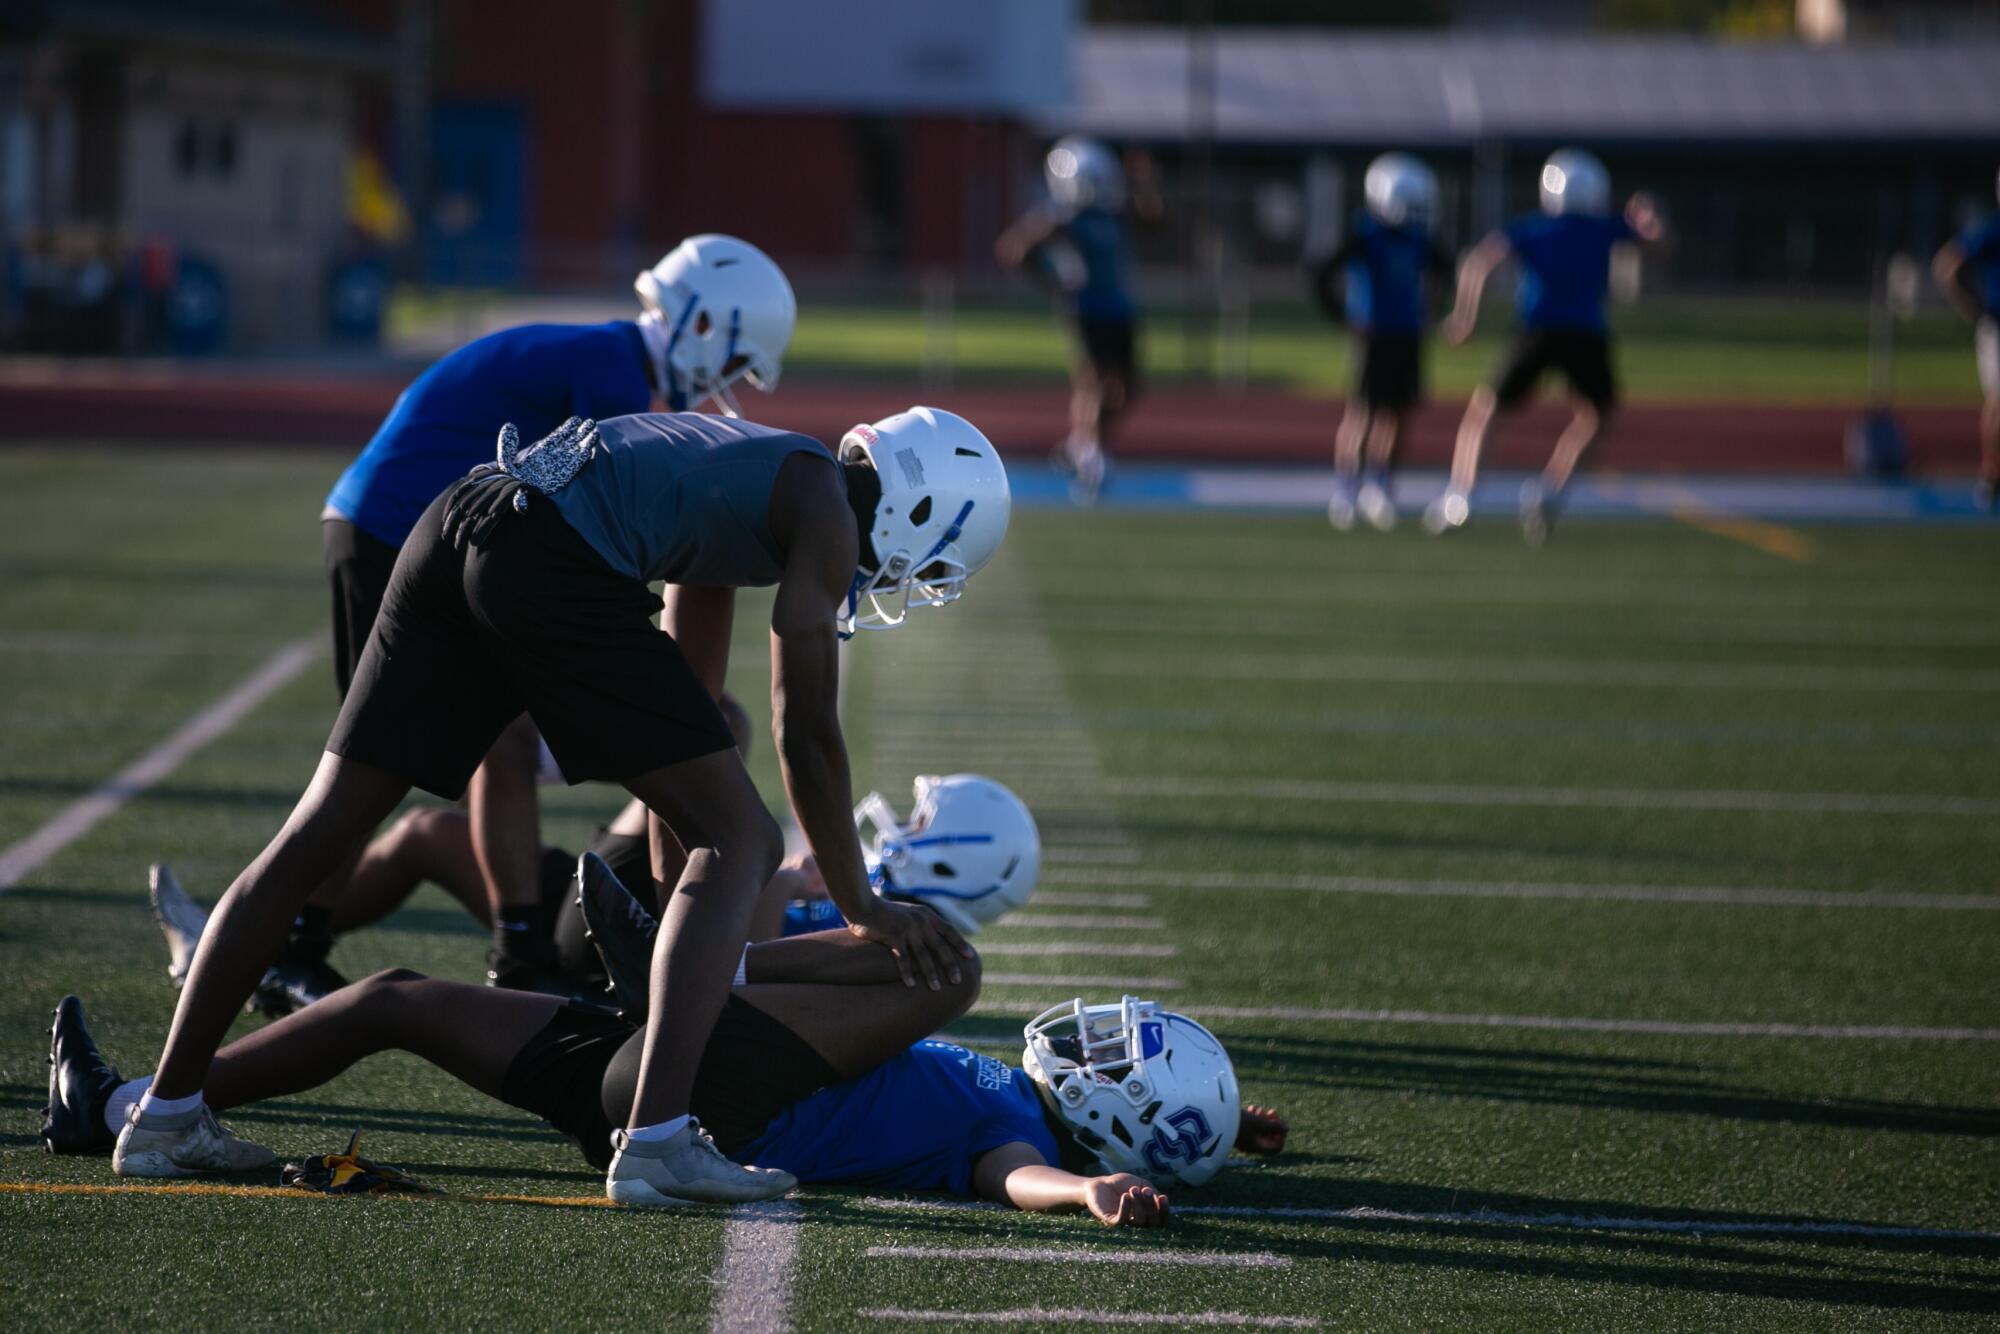 Culver City High players stretch during a practice Feb. 26 after restrictions for sports were relaxed.